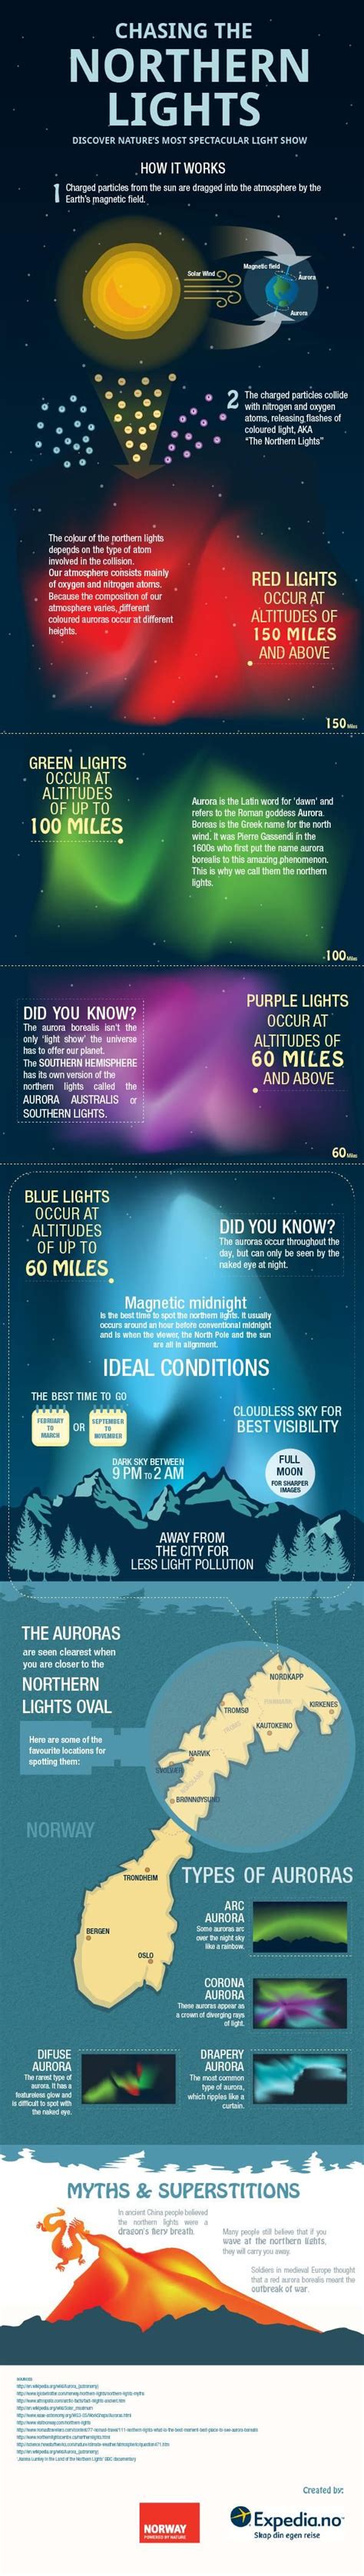 Northern Lights Infographic Official Travel Guide To Norway Visitnorway Com Northern